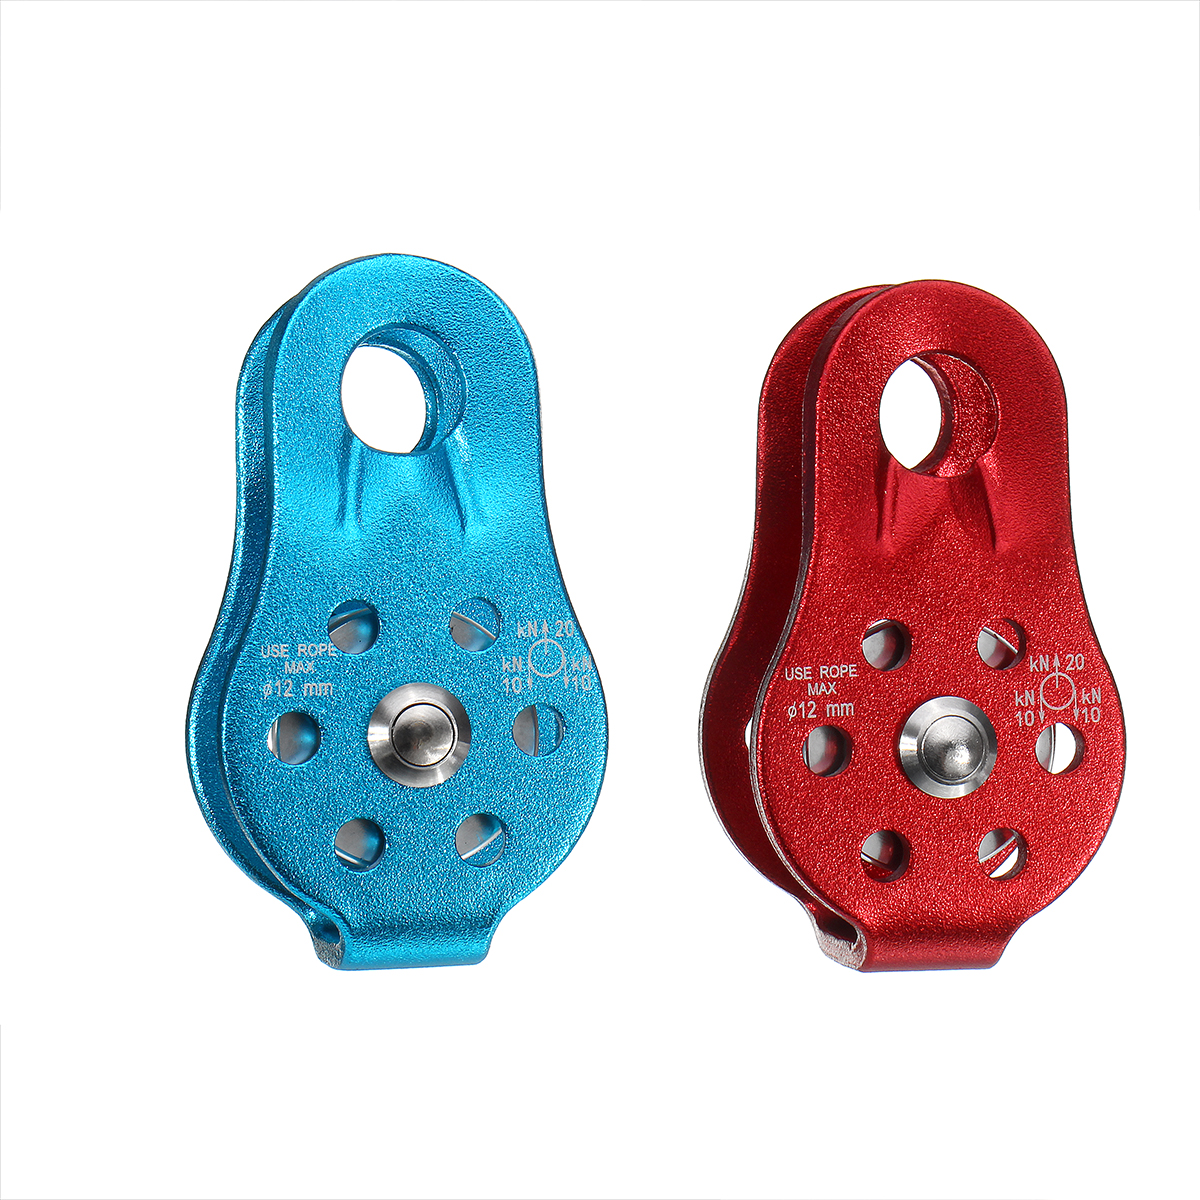 20KN-Aluminum-Alloy-Fixed-Rope-Climbing-Pulley-Outdoor-Camping-Hiking-Escape-Rescue-Tool-1625743-6